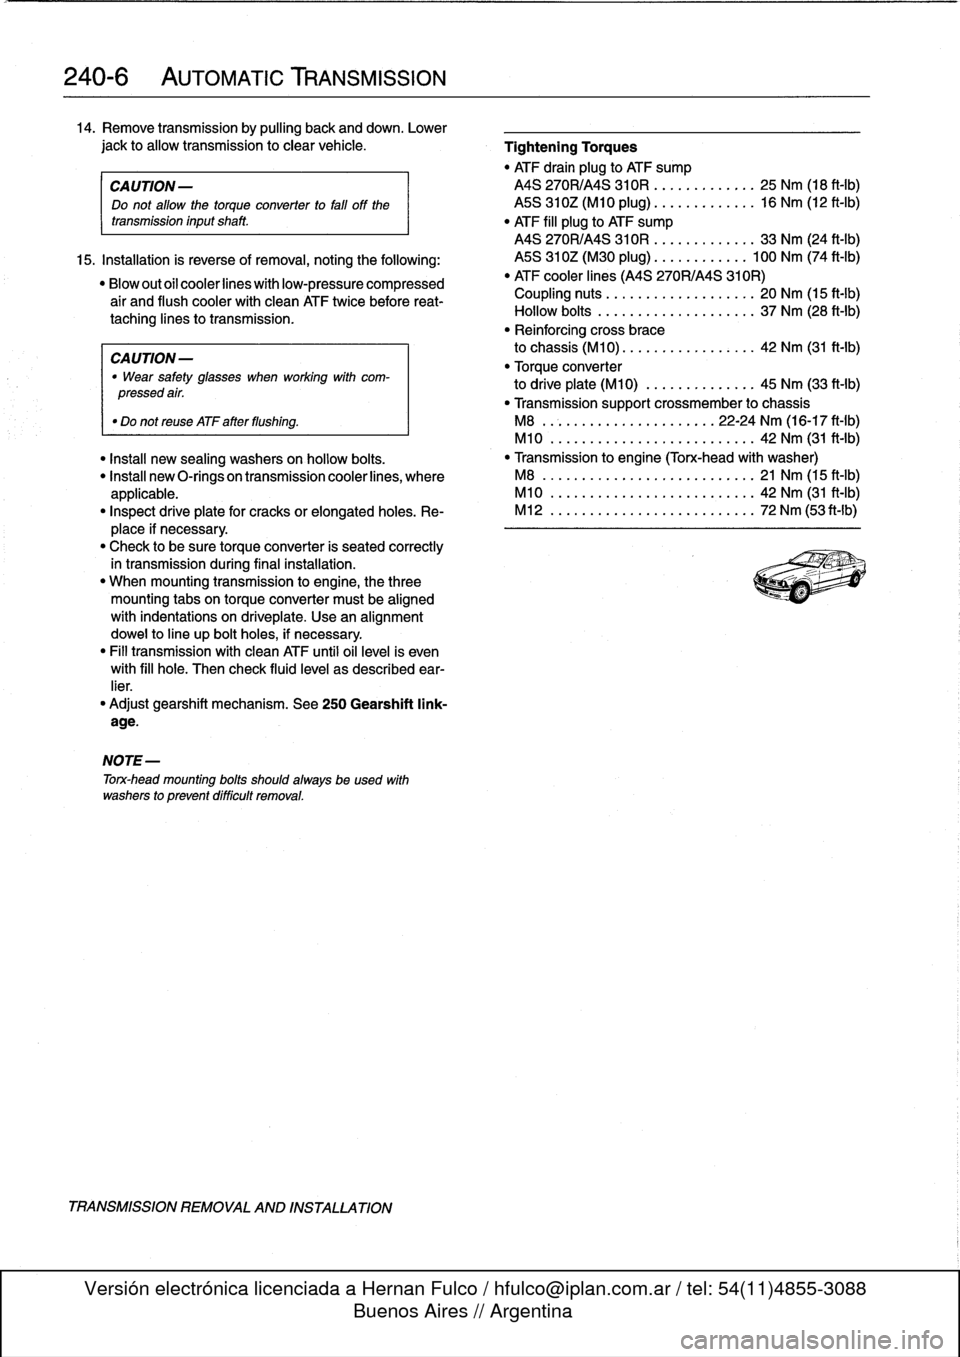 BMW 323i 1996 E36 Workshop Manual 
240-
6

	

AUTOMATIC
TRANSMISSION

14
.
Remove
transmission
by
pulling
back
and
down
.
Lower

jack
to
allow
transmission
to
clear
vehicle
.

	

Tightening
Torques

"
ATF
drain
plug
to
ATF
sump

CA
UT